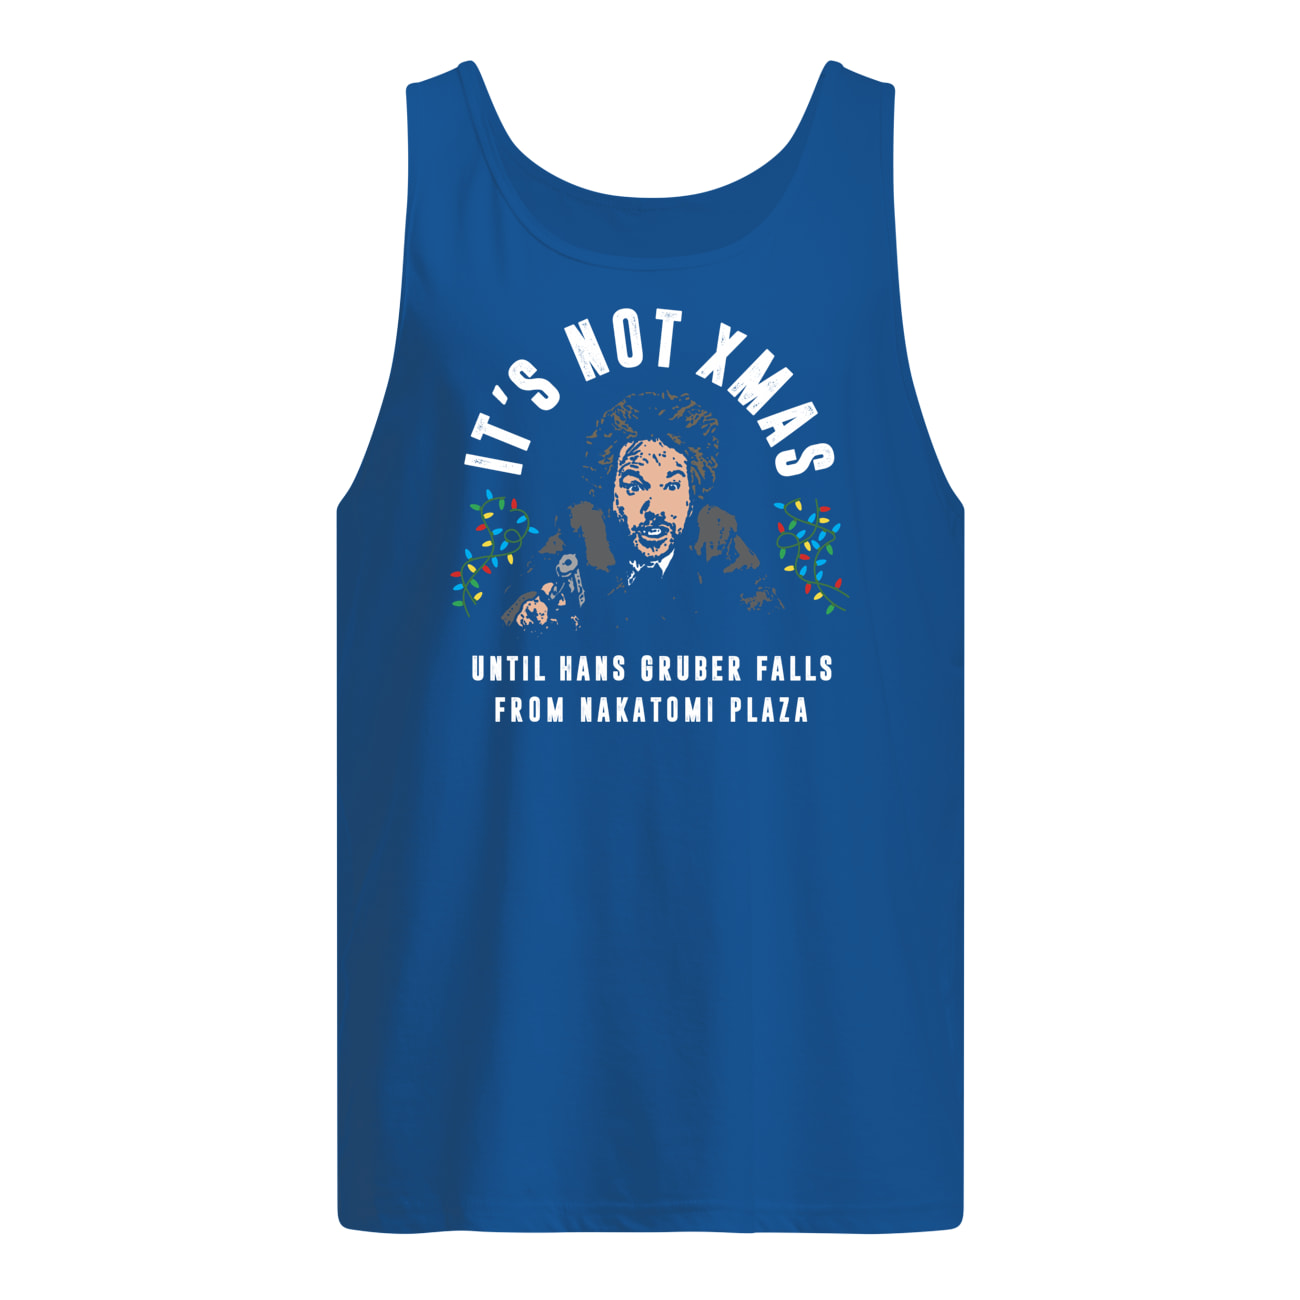 It's not xmas until hans gruber falls from nakatomi plaza tank top